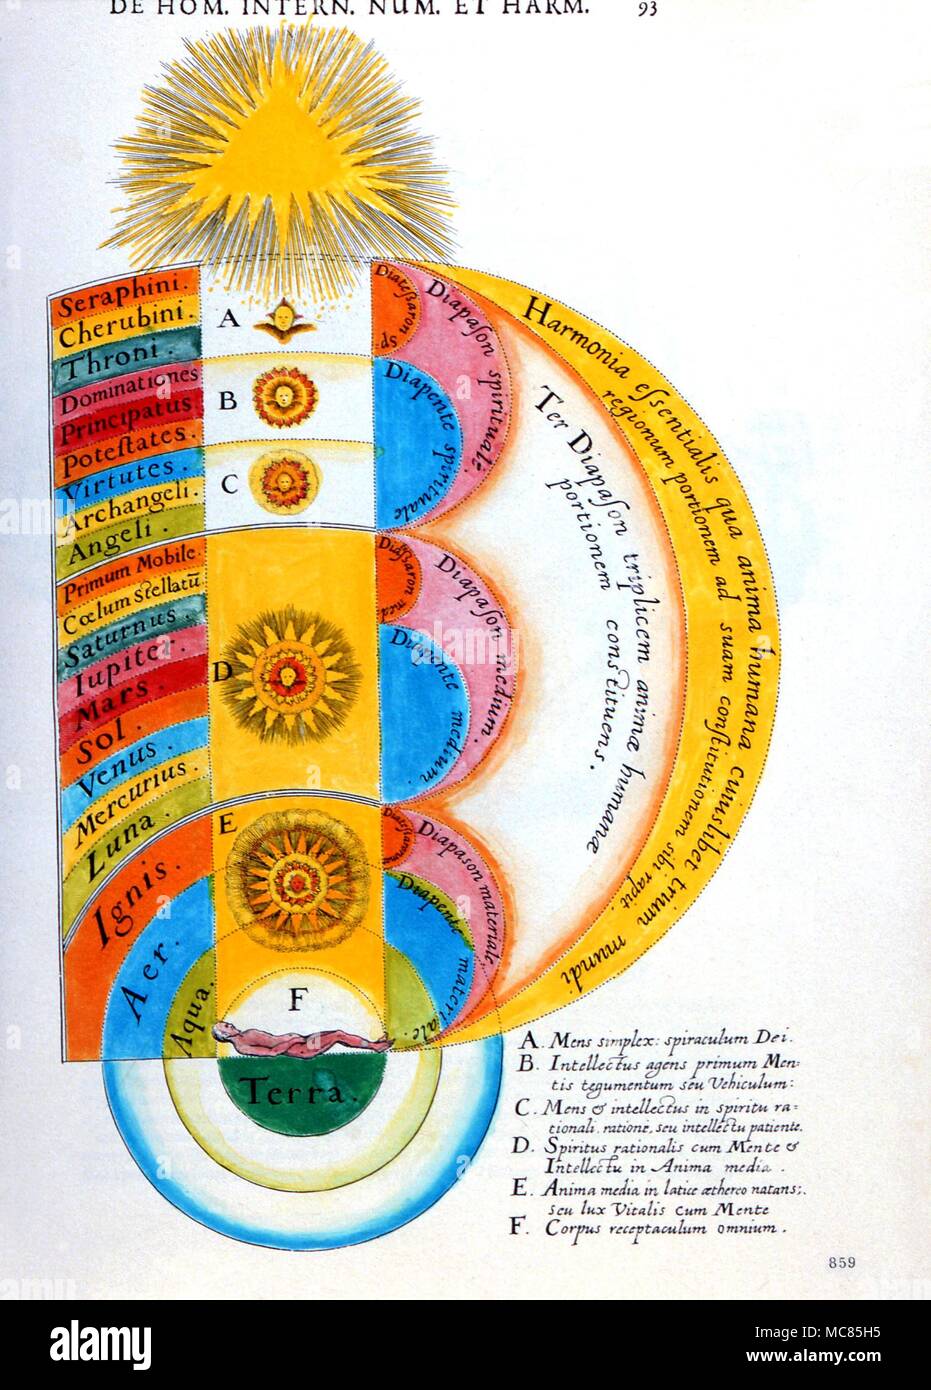 Astrology. The nine planetary spheres, as ratios of Pythagorean harmonics. Hand coloured (loose) engraving from 1621 edition of Robert Fludd's 'Opera Omnia'. The abstract Trinitarian 'God' is linked to the earth by means of geometric ratios, linked to musical intervals. The ratios are essentially arcane versions of Pythagorean philosophy. Stock Photo